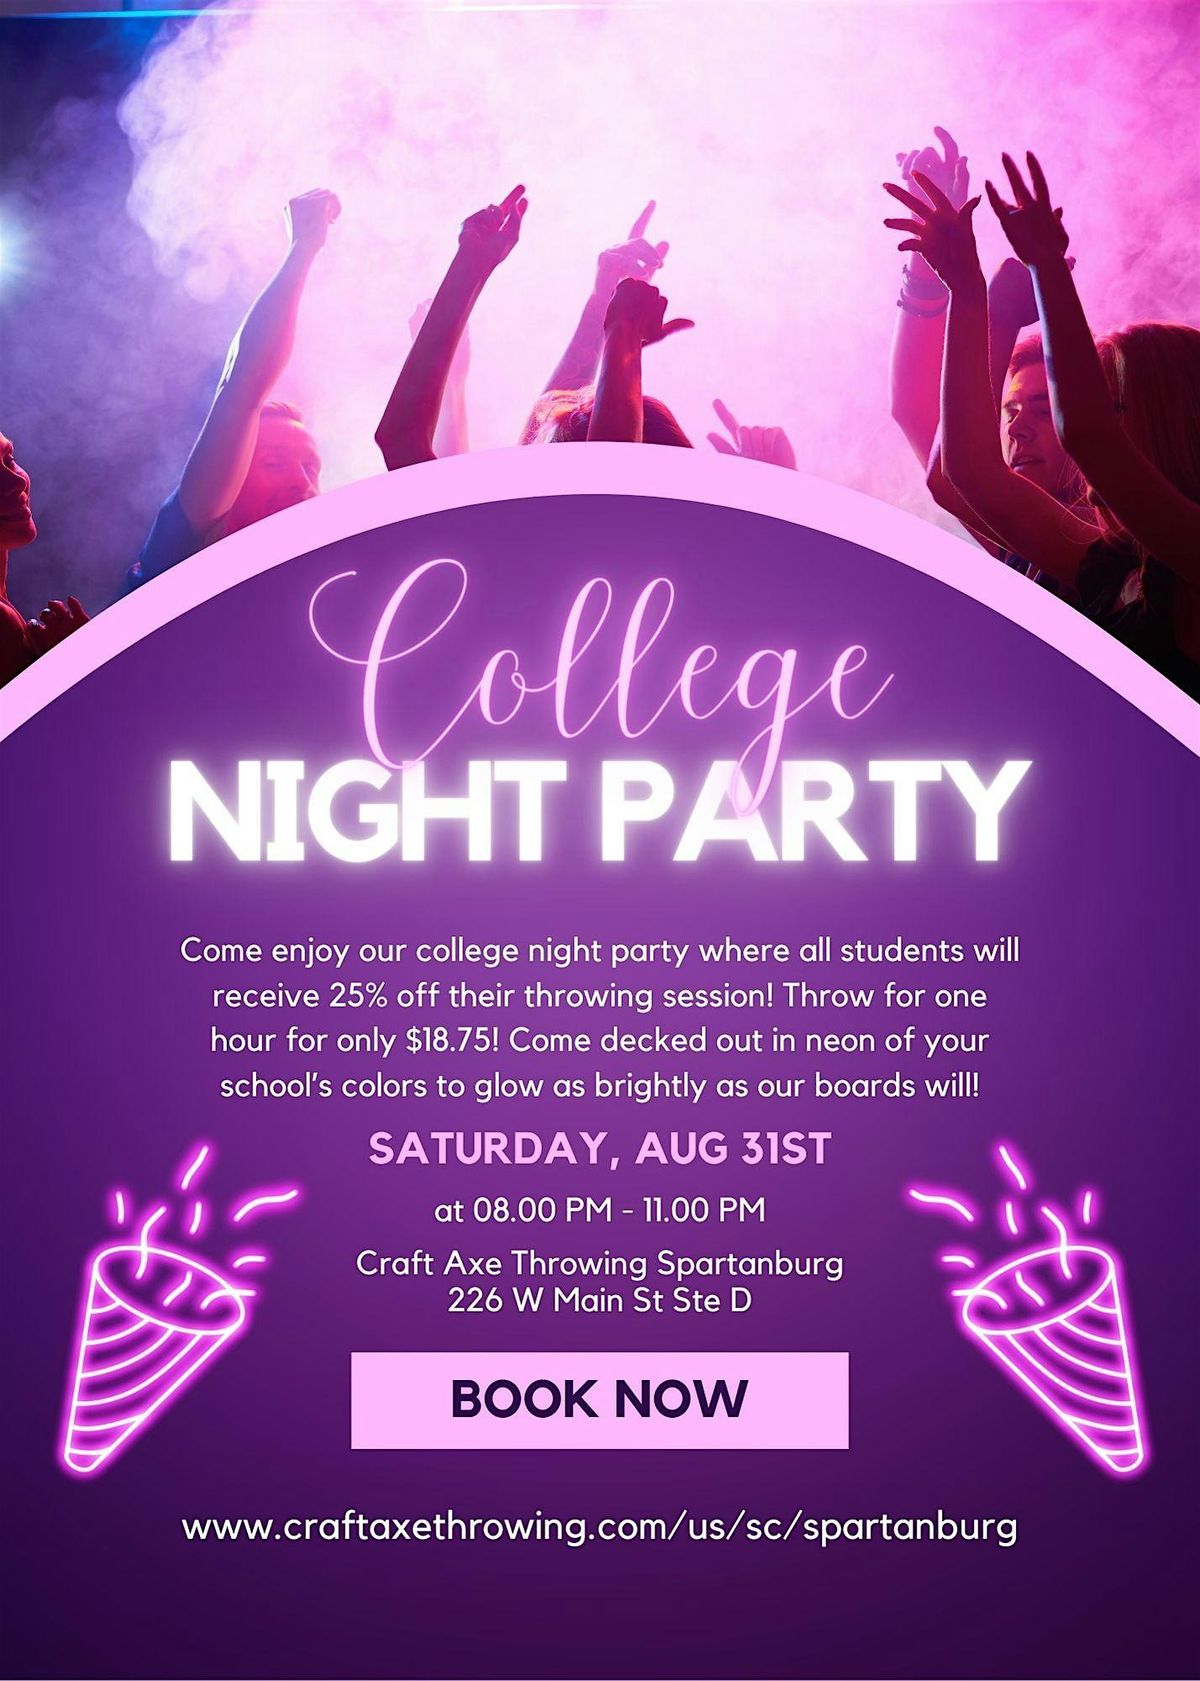 College Night Party!